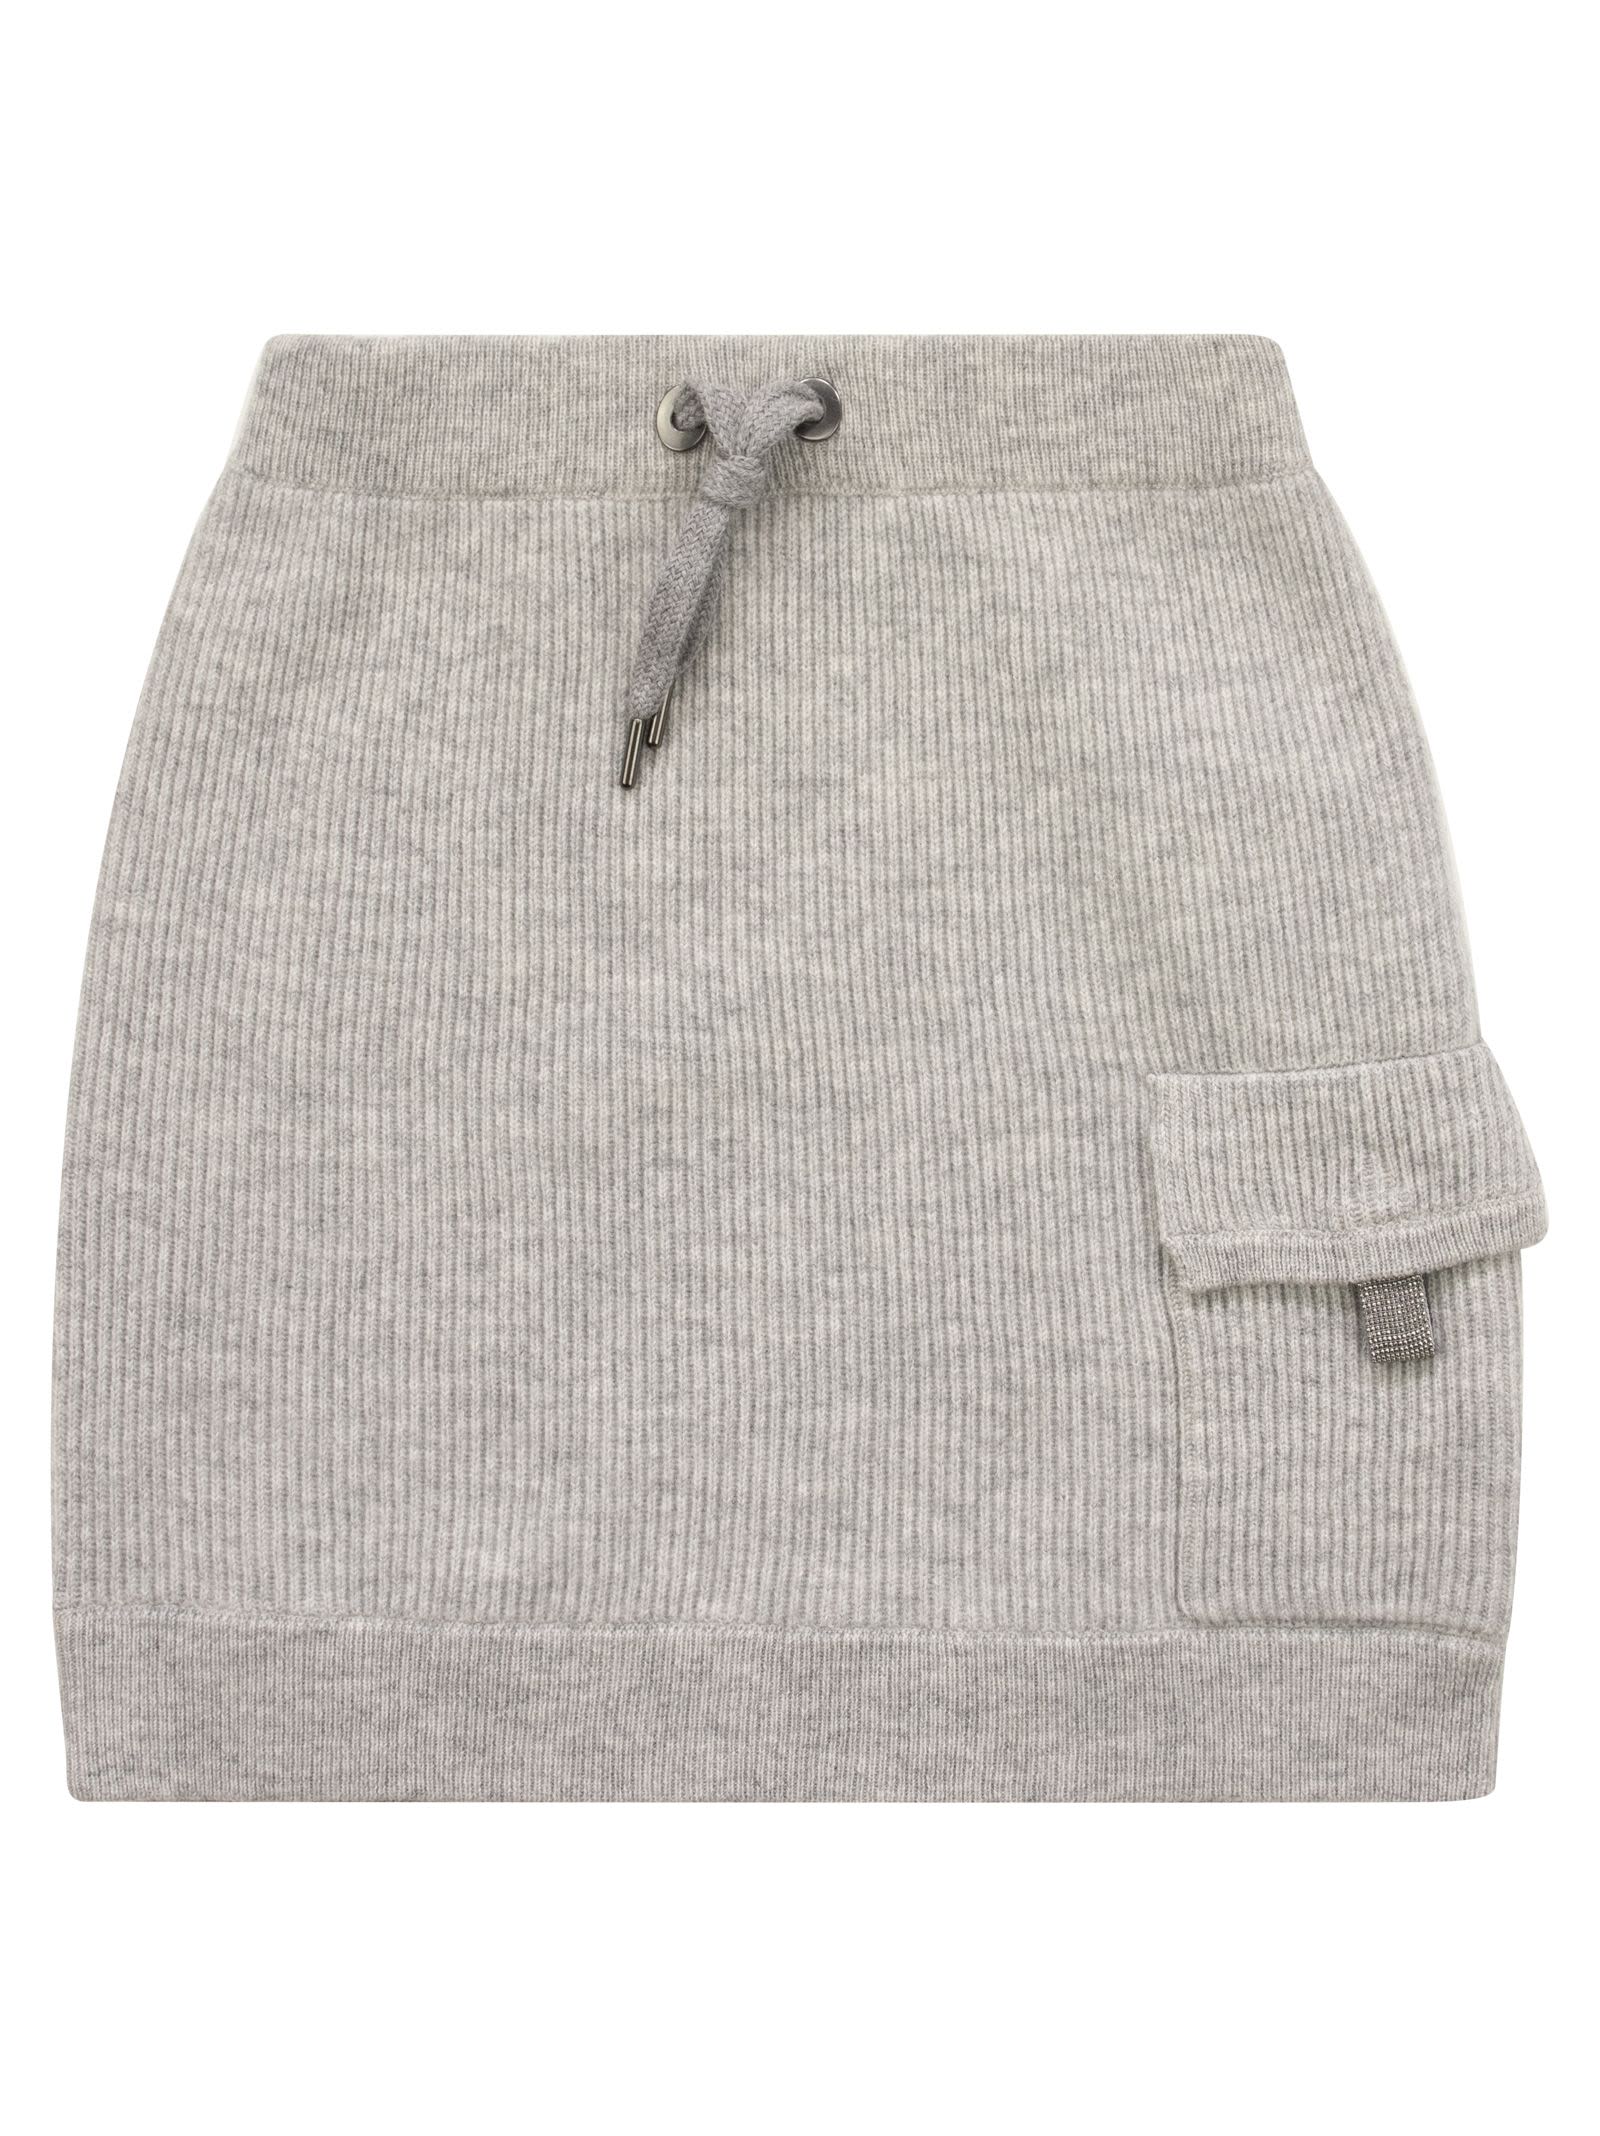 Brunello Cucinelli English Rib Cashmere Knit Skirt With Necklace